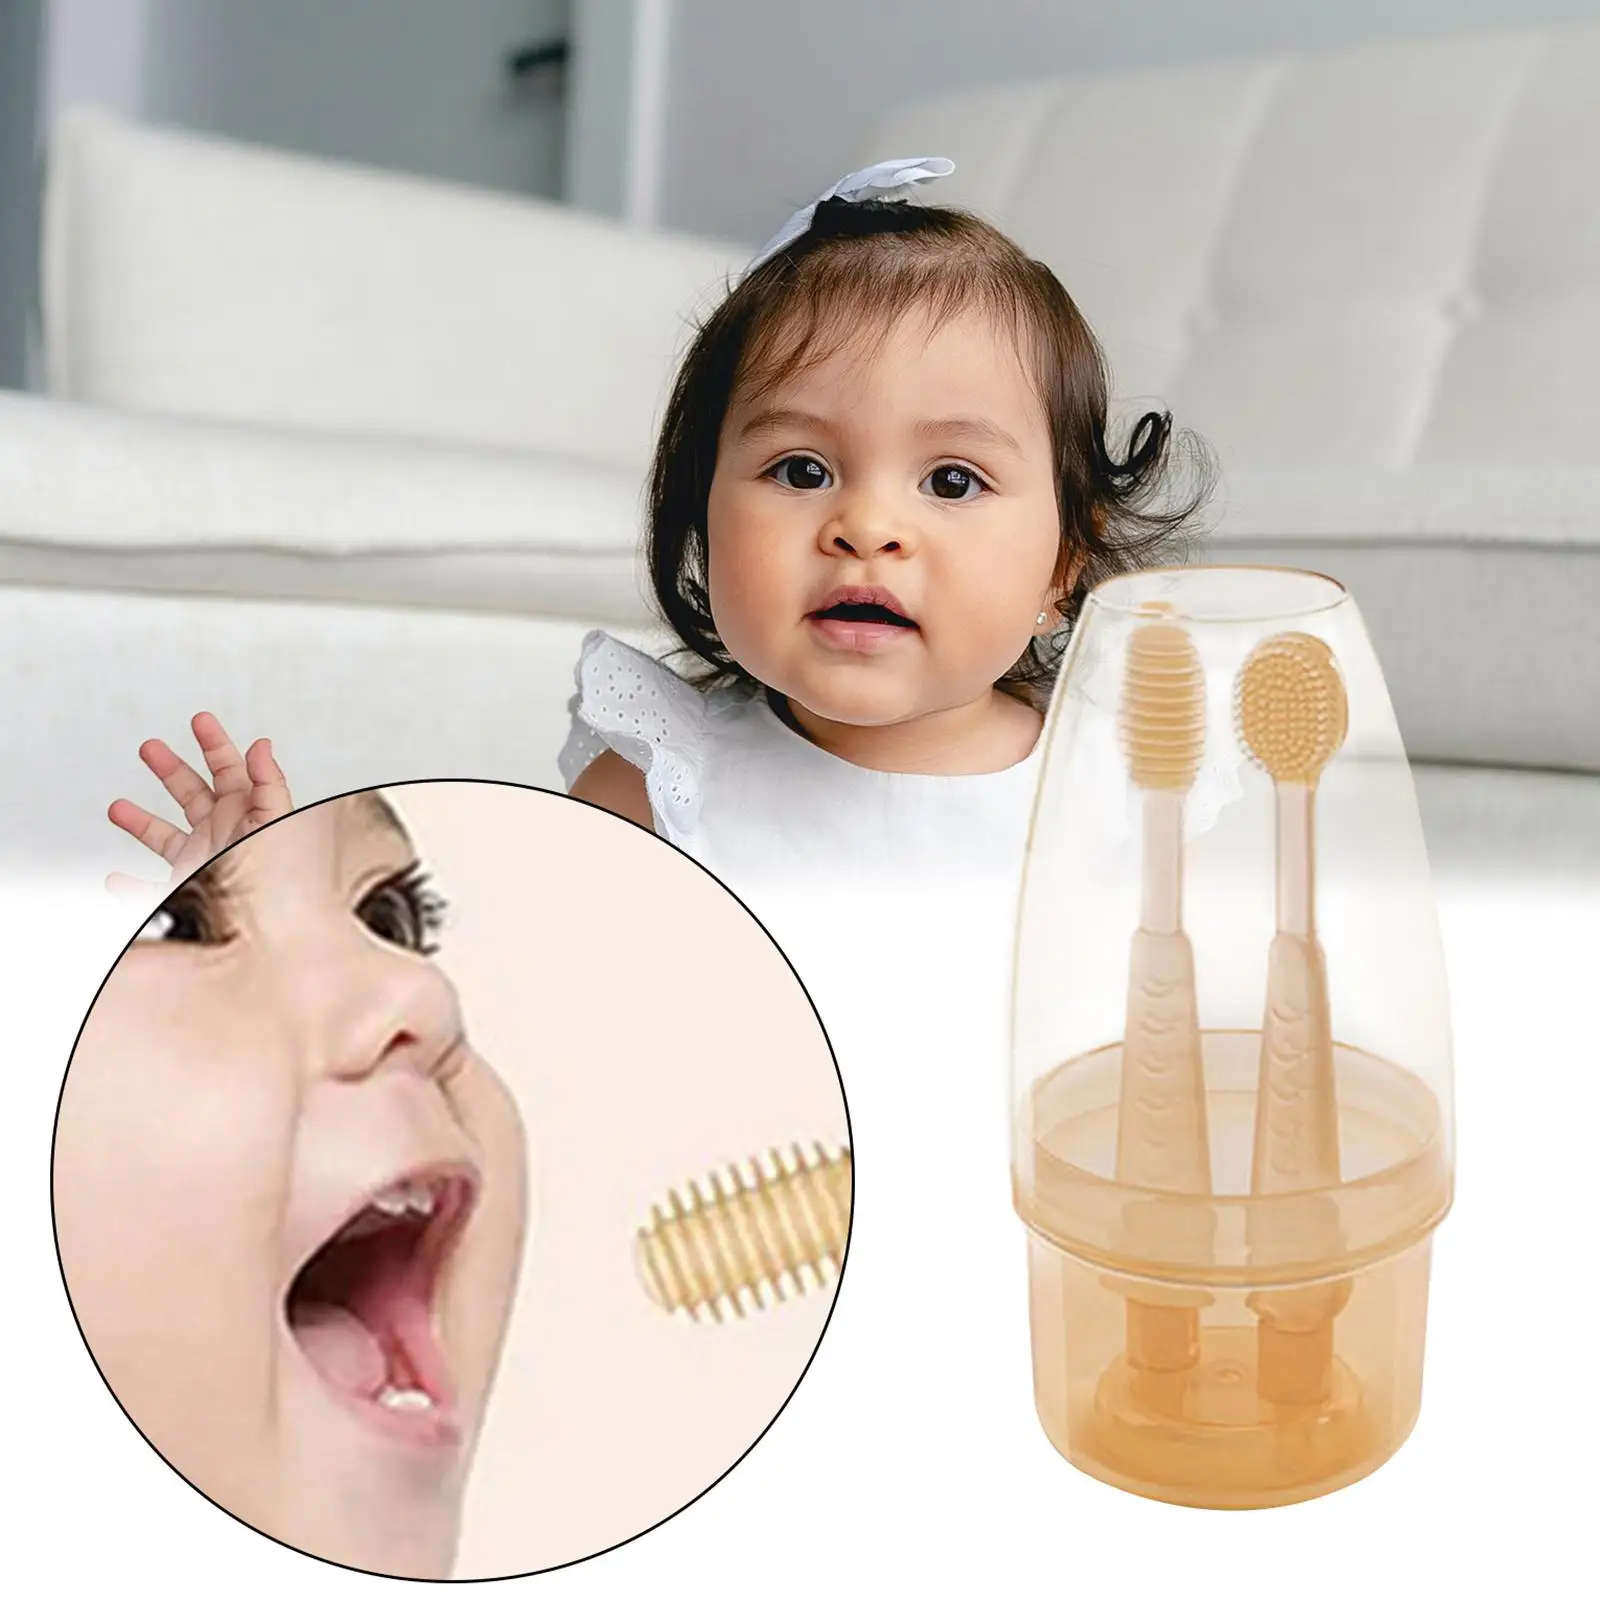 

Baby Toothbrush Set Silicone Easy to Hold Oral Care Tongue Cleaner Training Toothbrush for Infant Newborns Sore Gums 0-18 Months